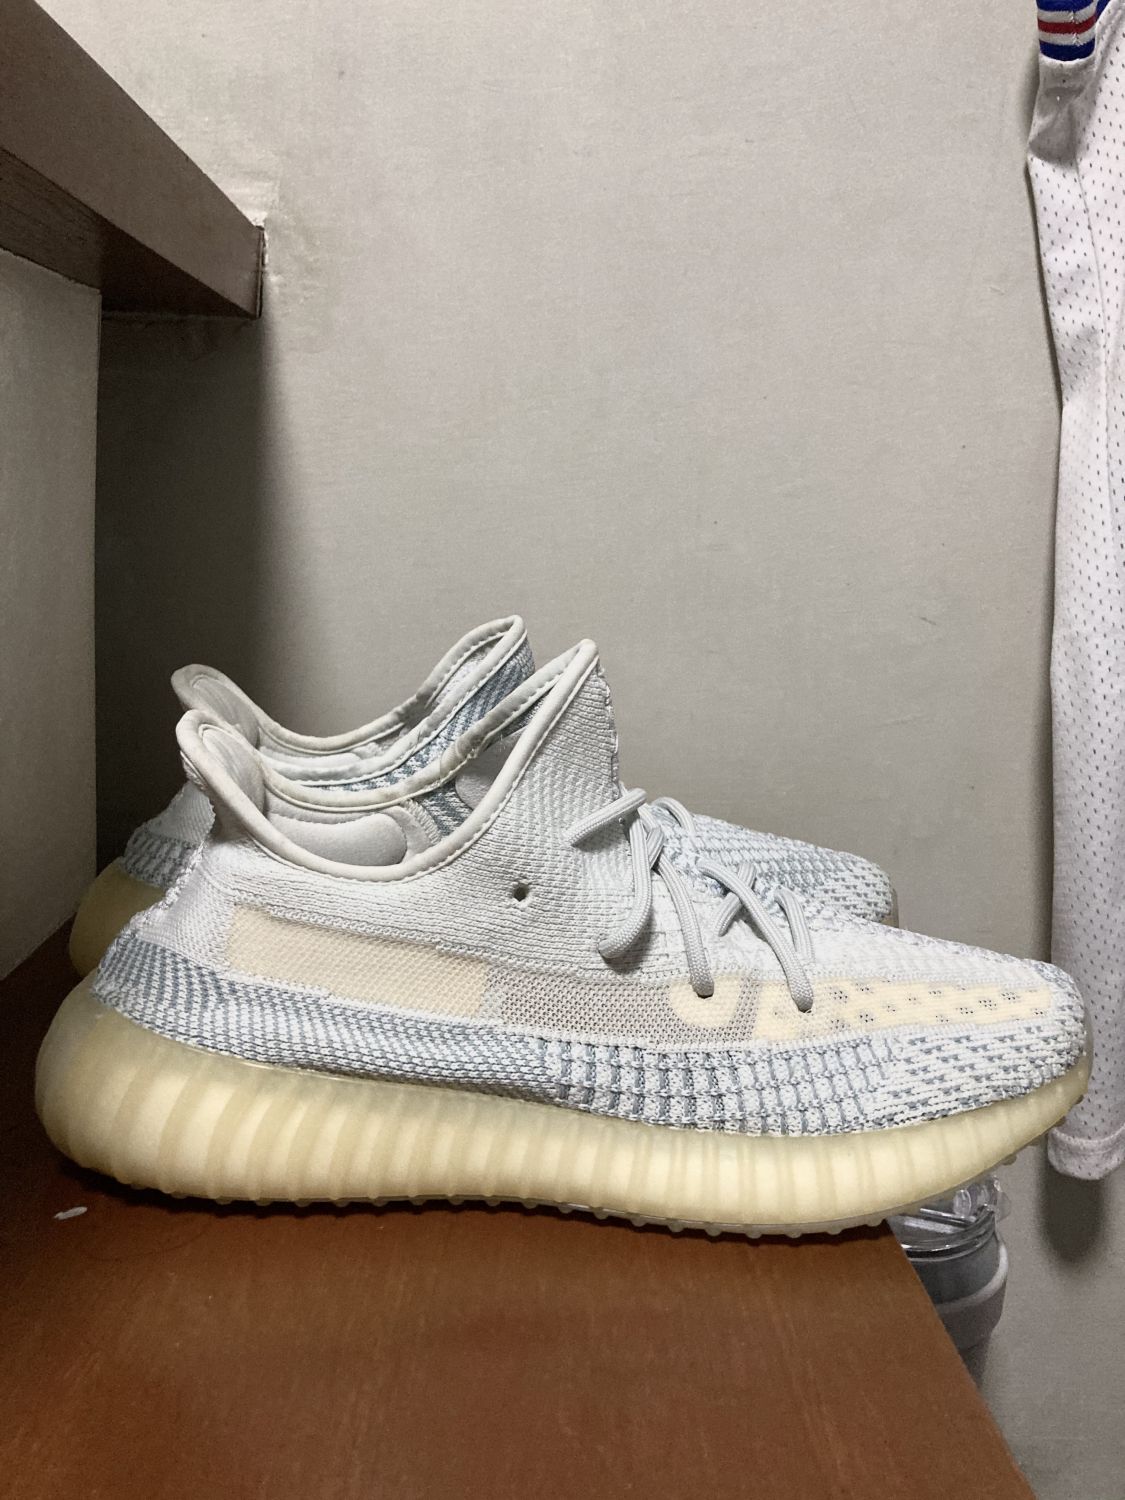 Adidas Yeezy Boost 350 V2 Cloud White (Non-Reflective) | AfterMarket